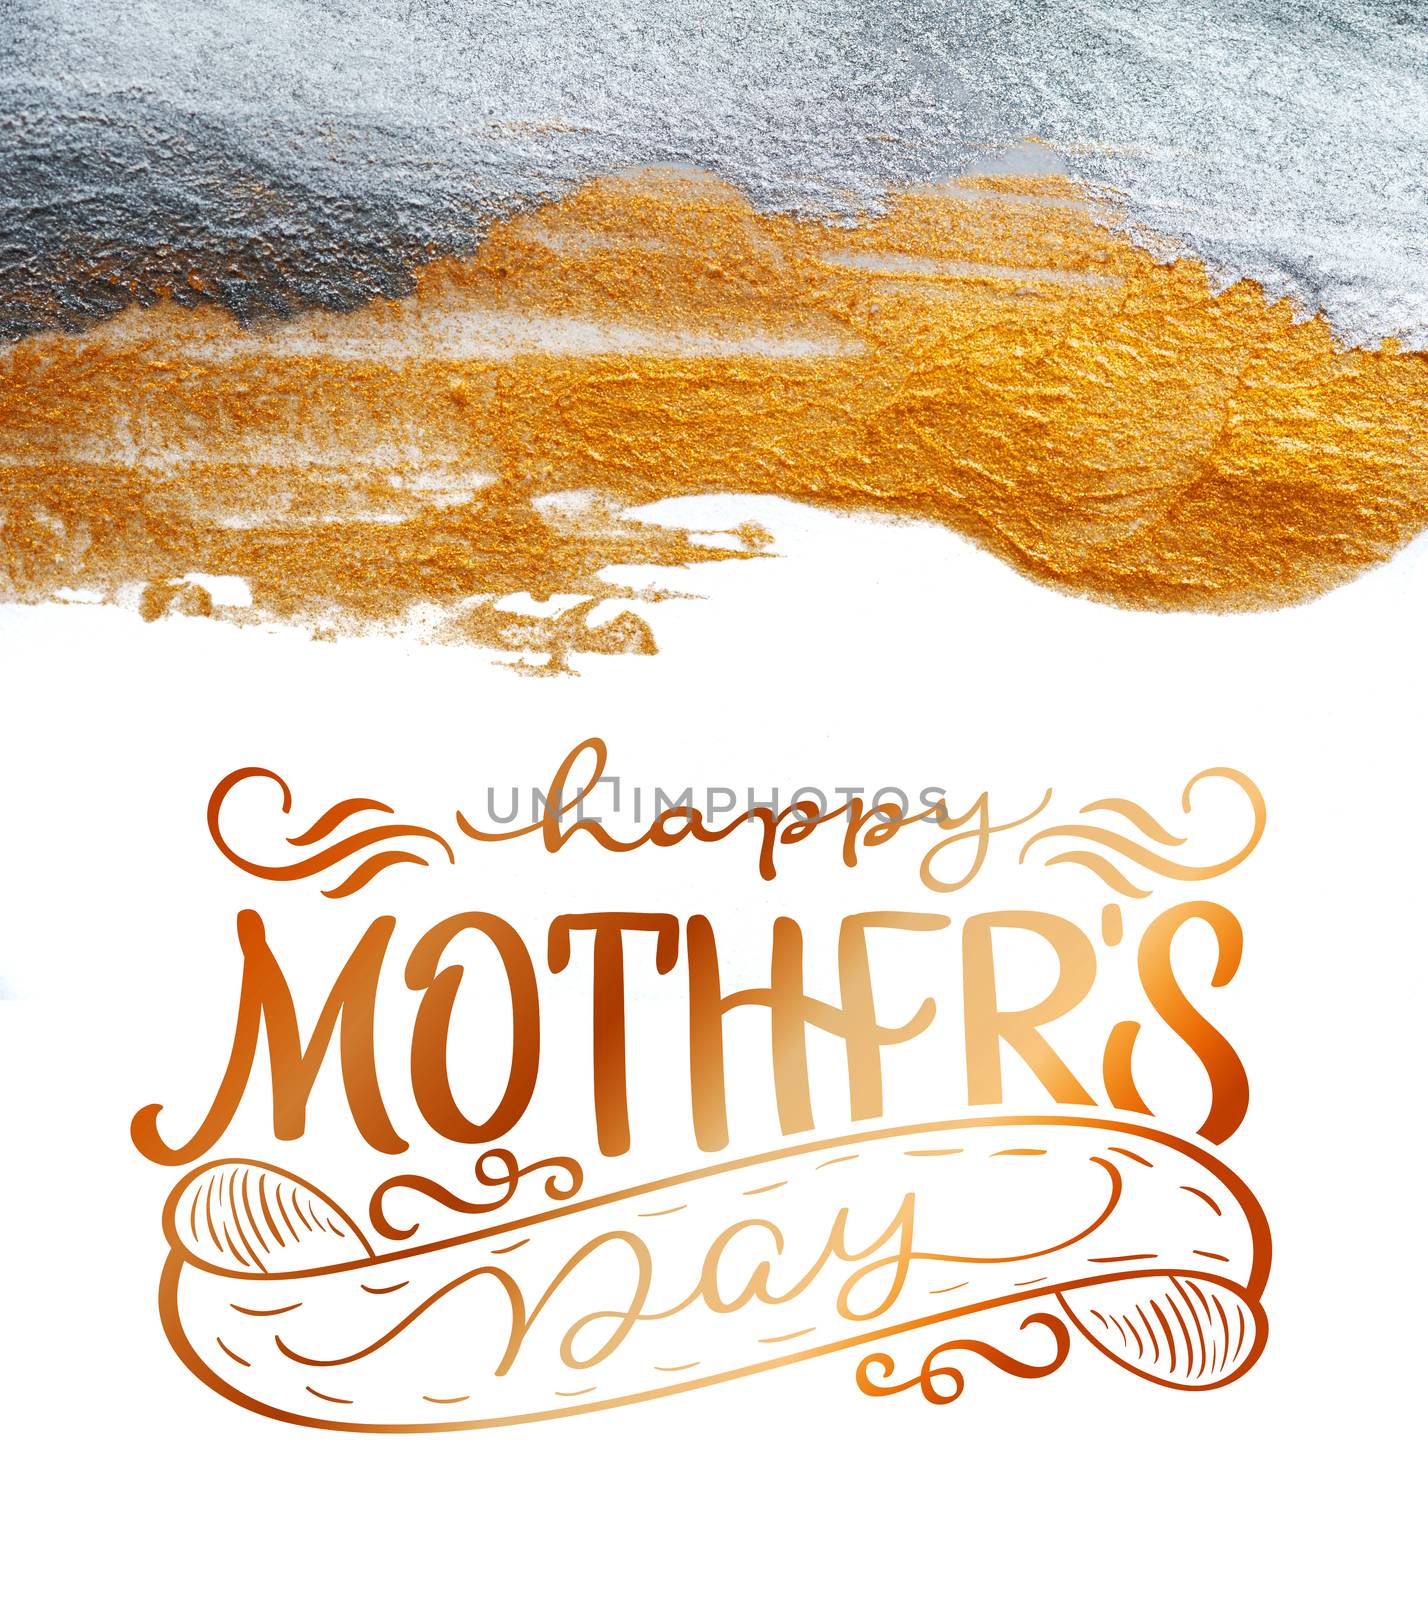 Abstract golden and silver background with a brush of acrylic paint on paper and text Happy mothers day. Calligraphy lettering hand draw by timonko